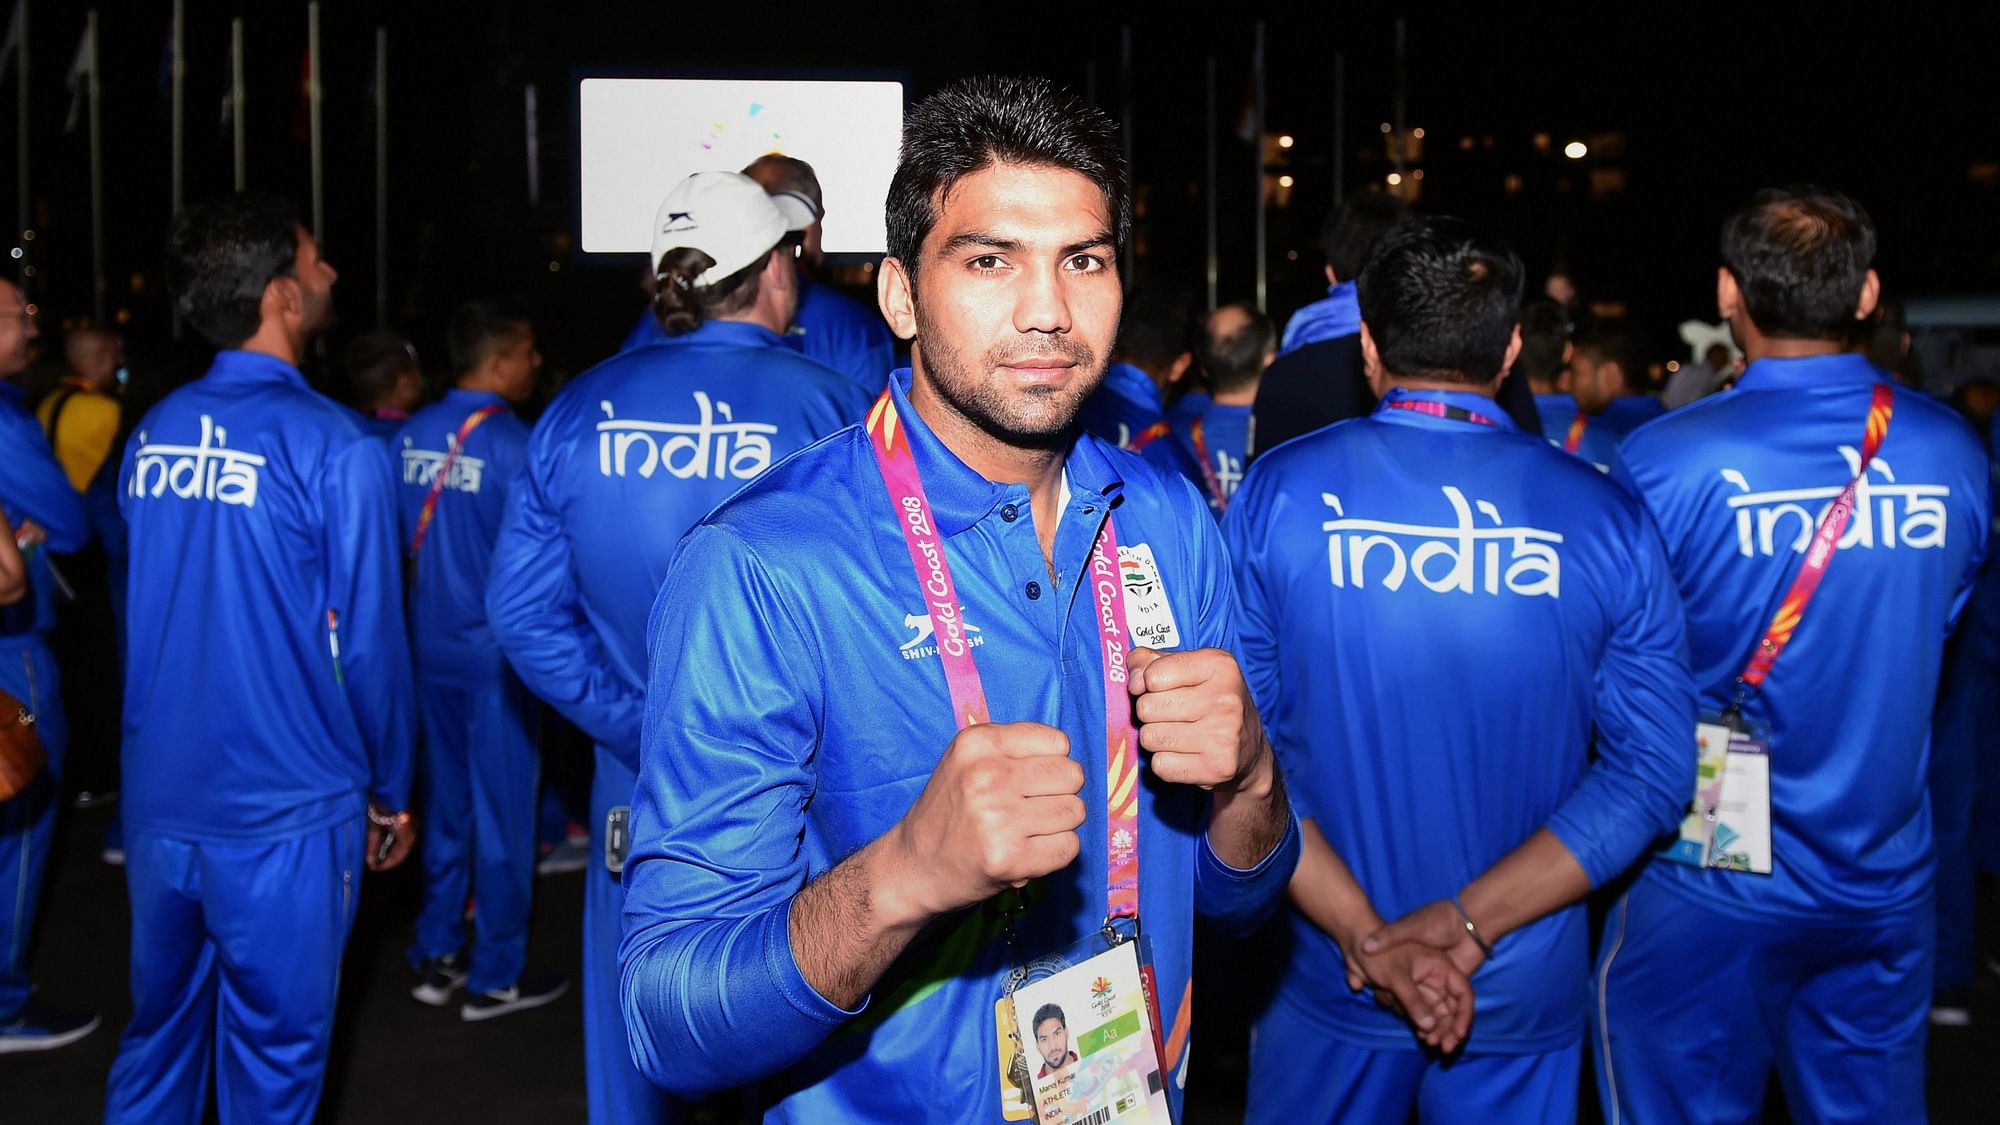 Indian boxer Manoj Kumar claims he’s being denied funds by SAI to treat his groin injury.